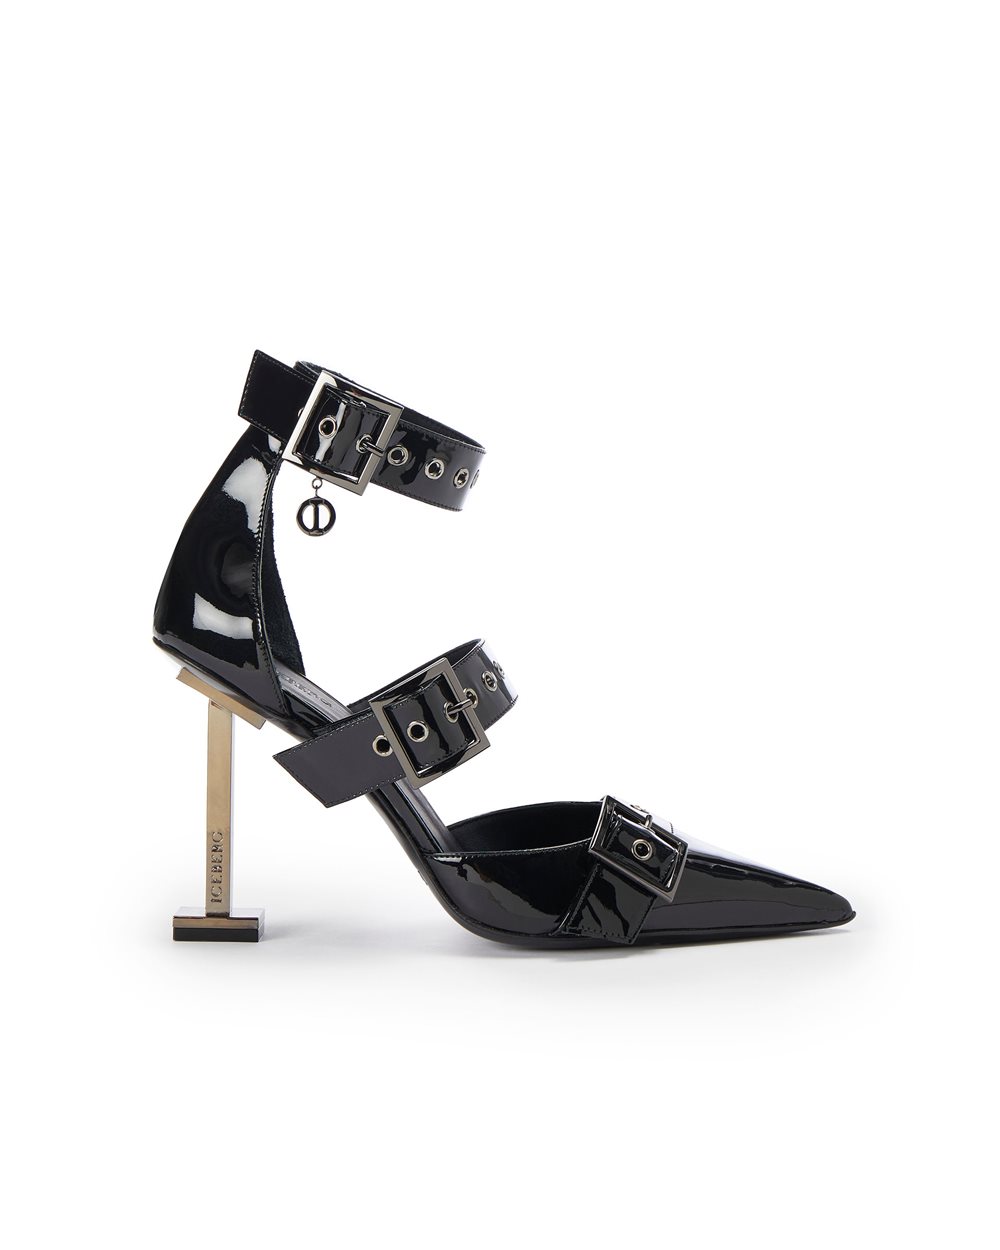 Black pumps with iconic heel - SHOES | Iceberg - Official Website